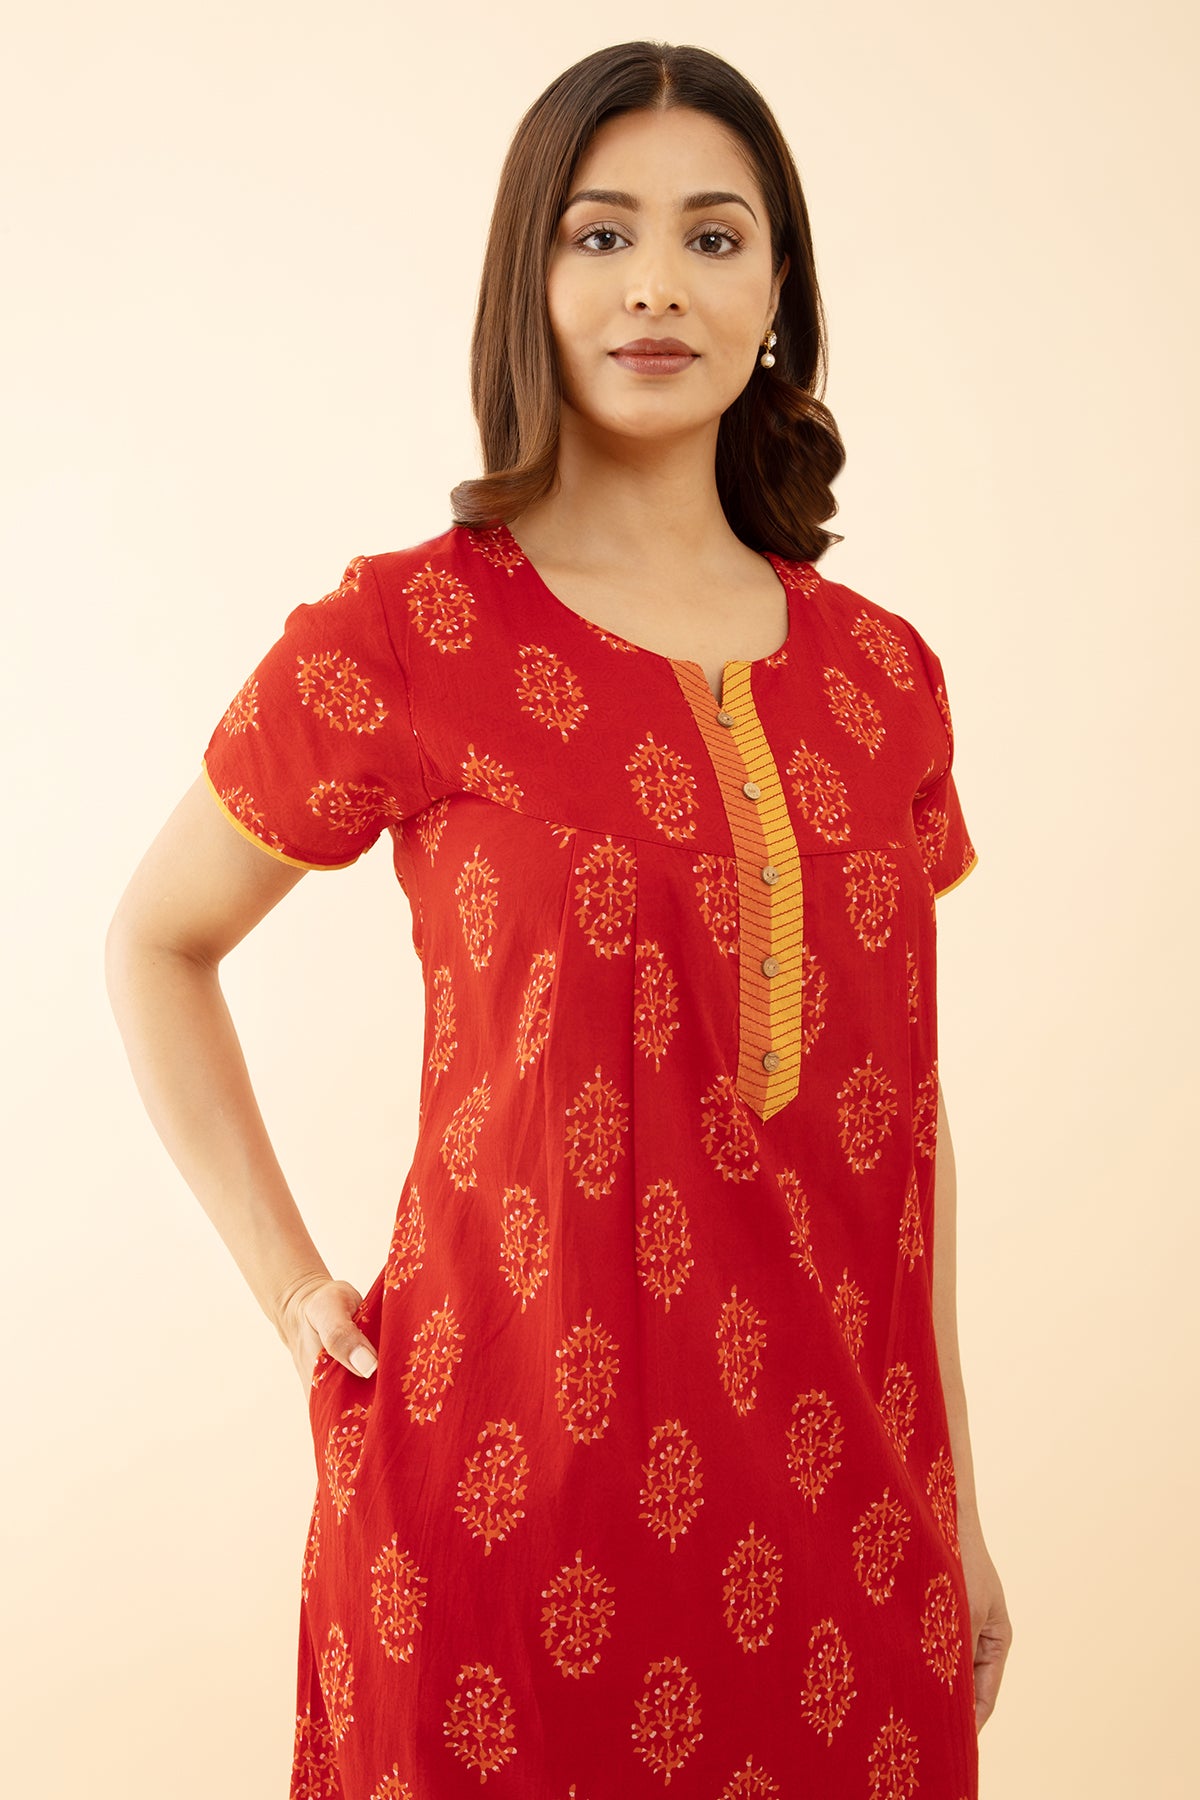 Red Floral Cotton Nighty: Printed Round V-Neck Design